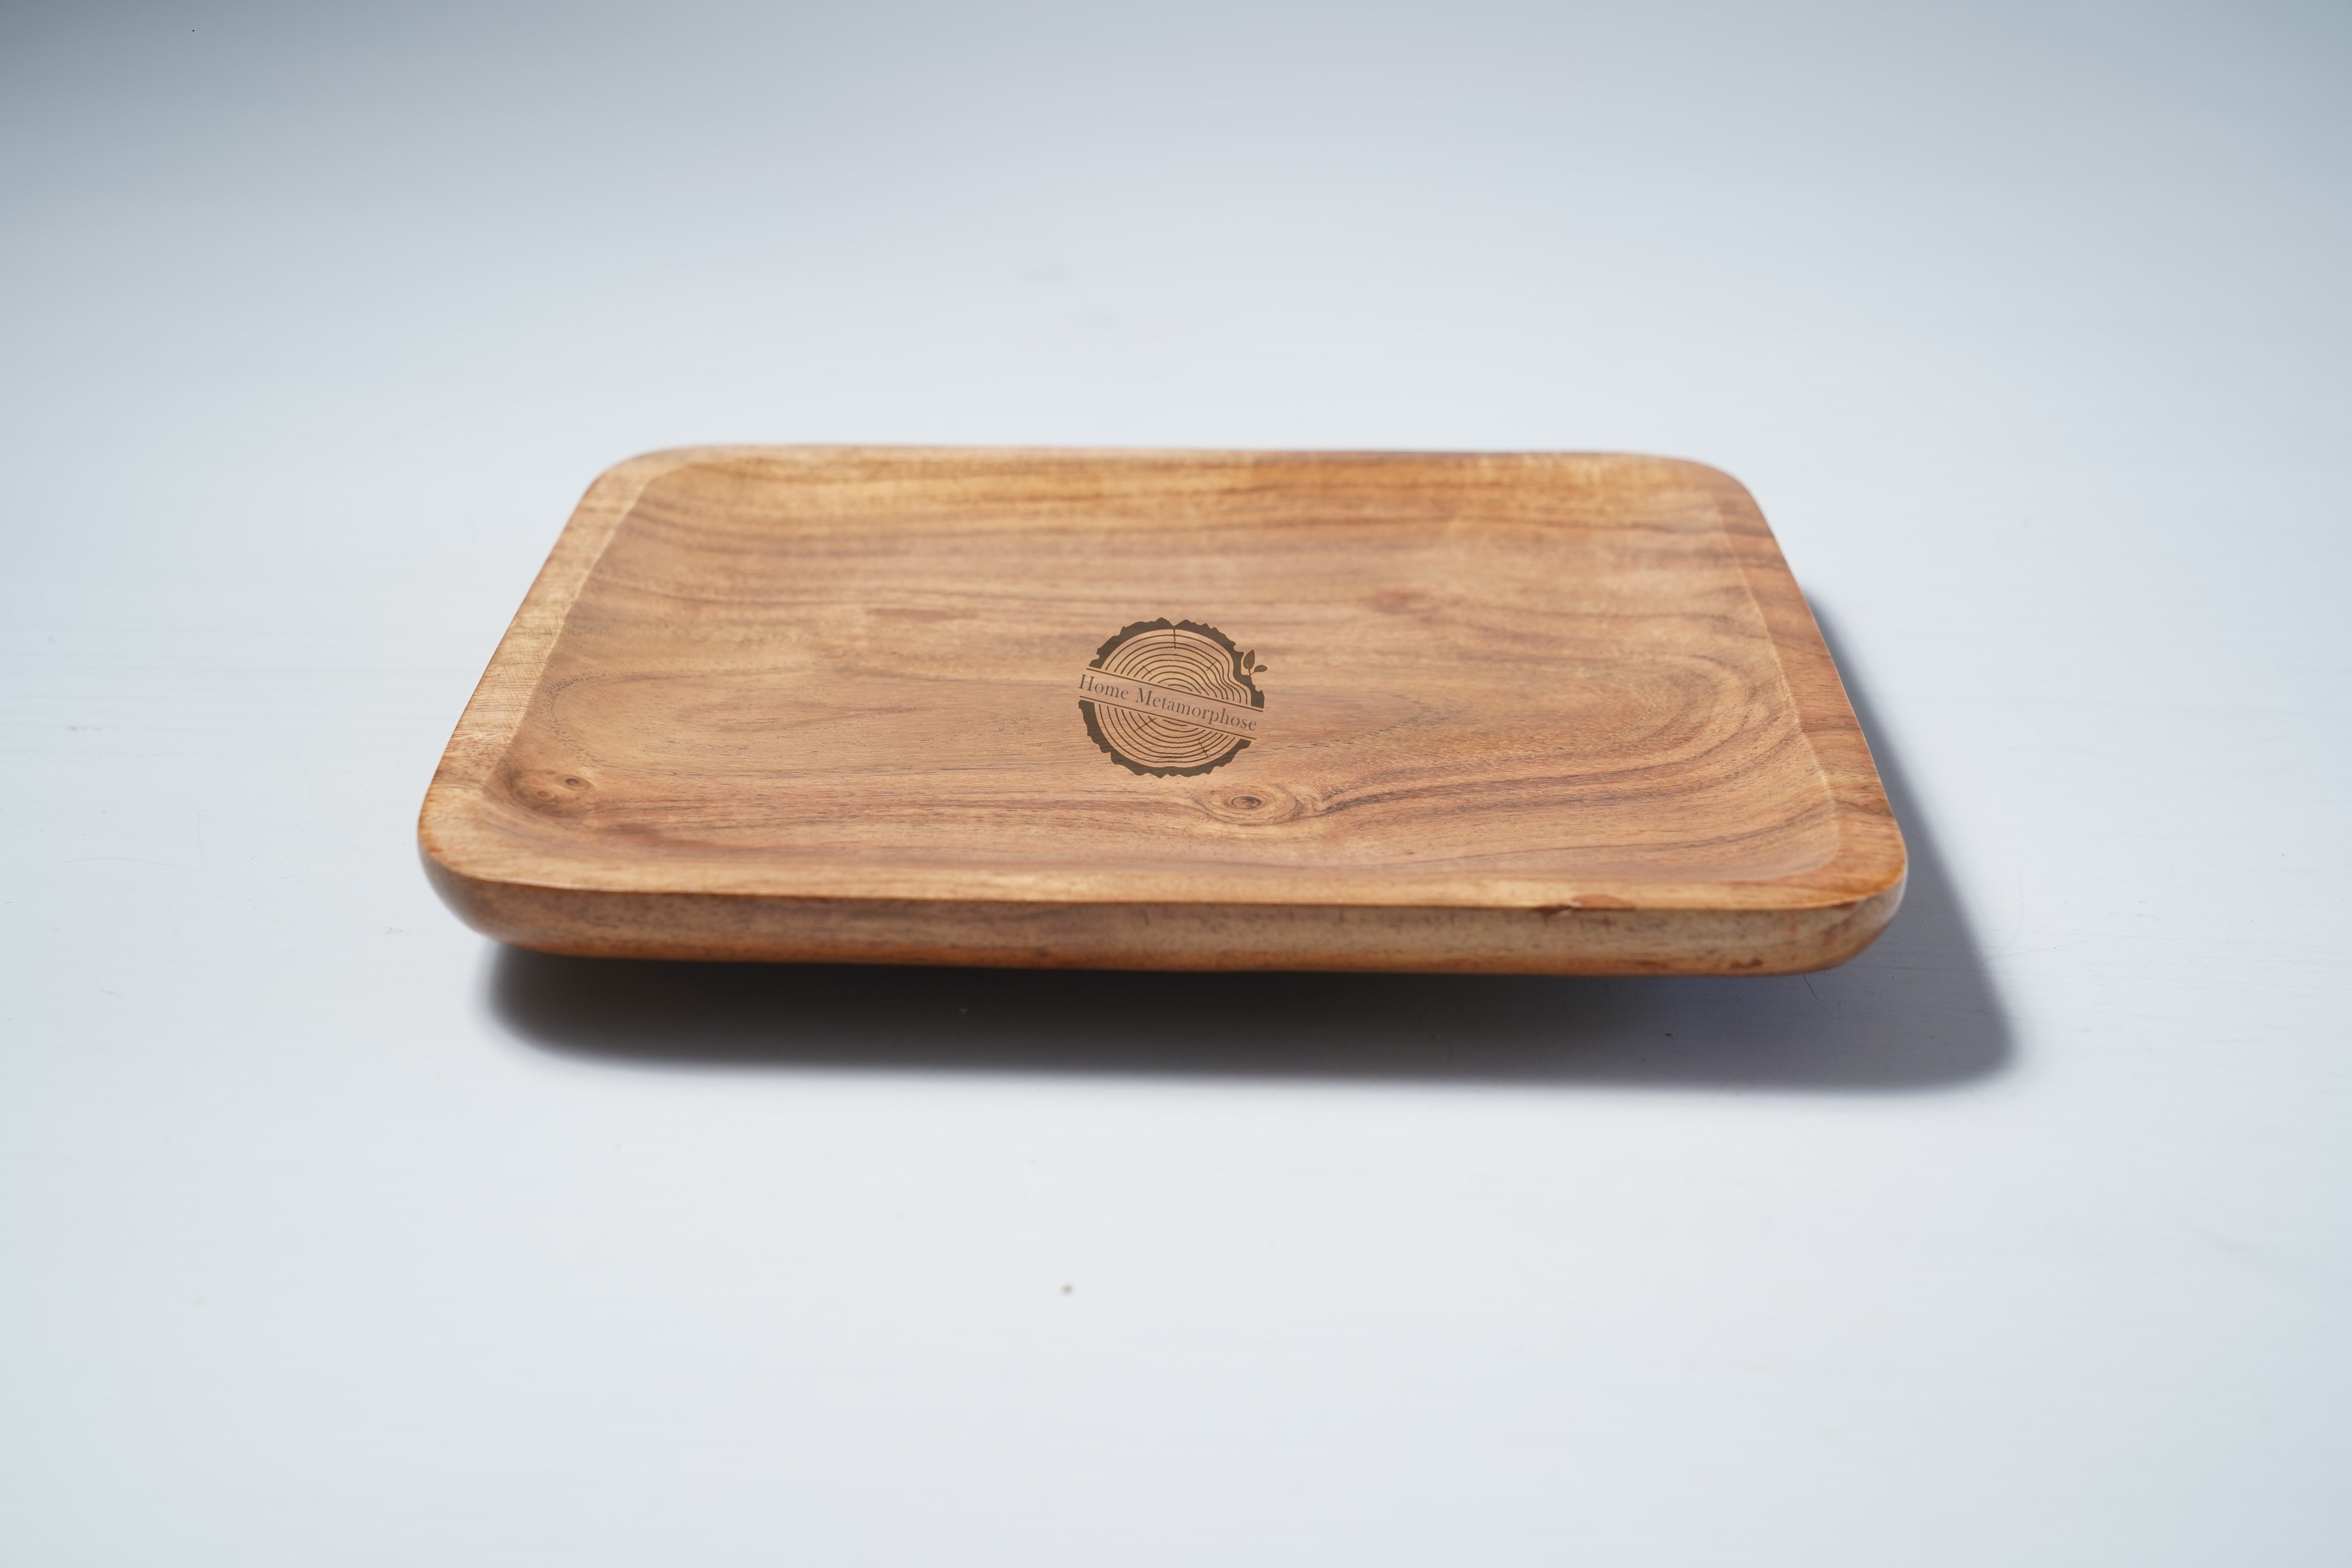 Wood Square Serving Tray, Set of 12 each 8 Inch Square Wood Serving Platter Wooden Serving Board, Square Acacia Wood Plates for Charcuterie, Fruit, Bread Square Platter